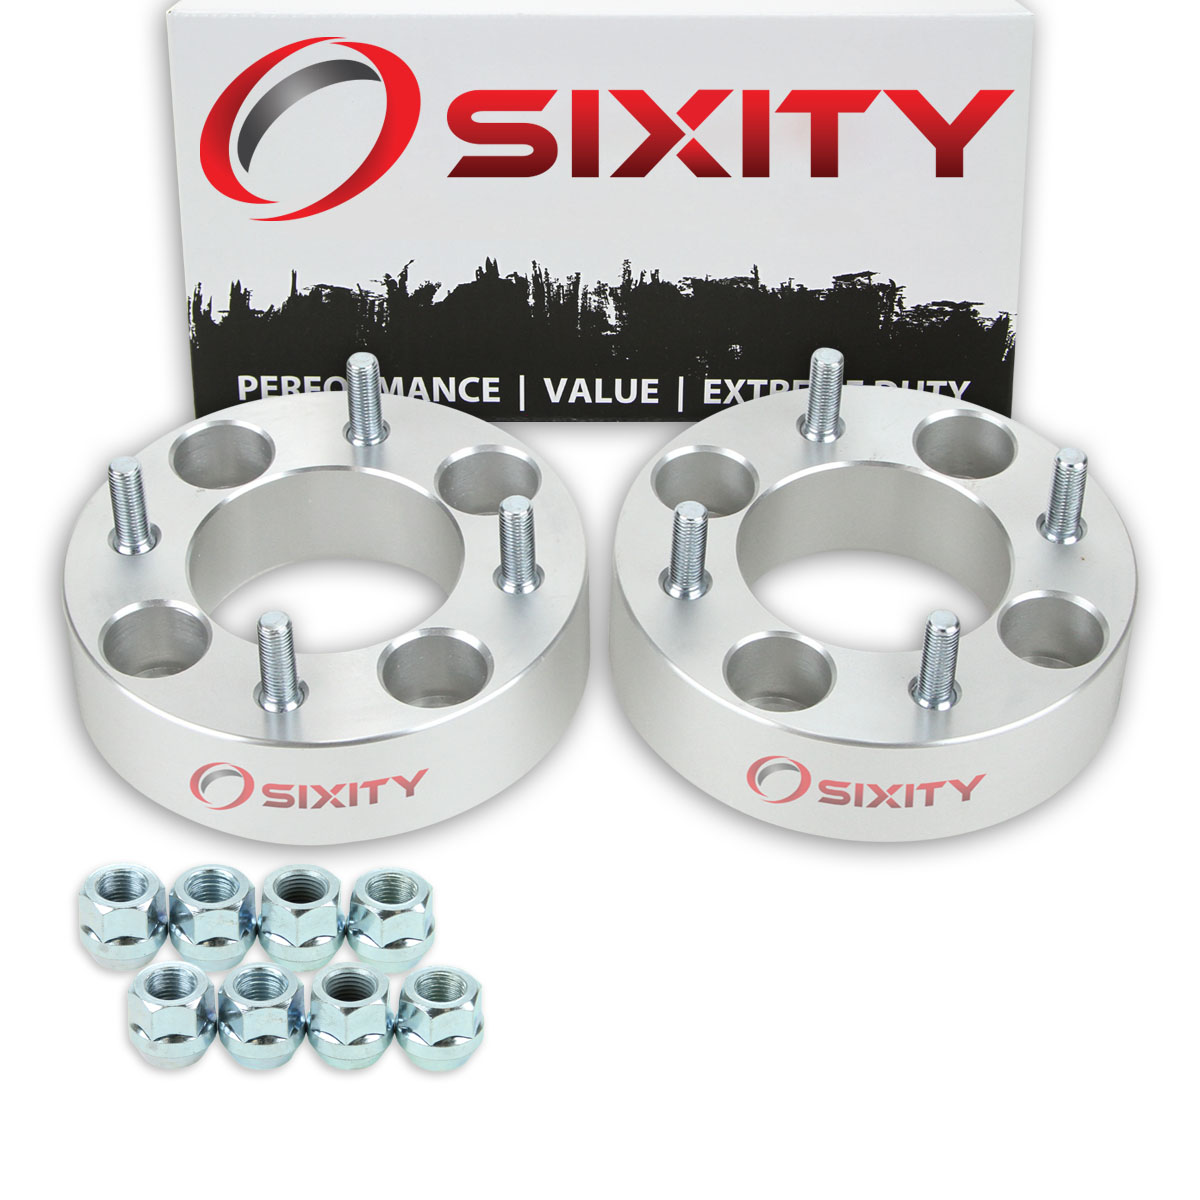 Sixity 2 pc 1.5 Inch 1990-1997 Honda TRX 200 4/110 Front Wheel Spacers